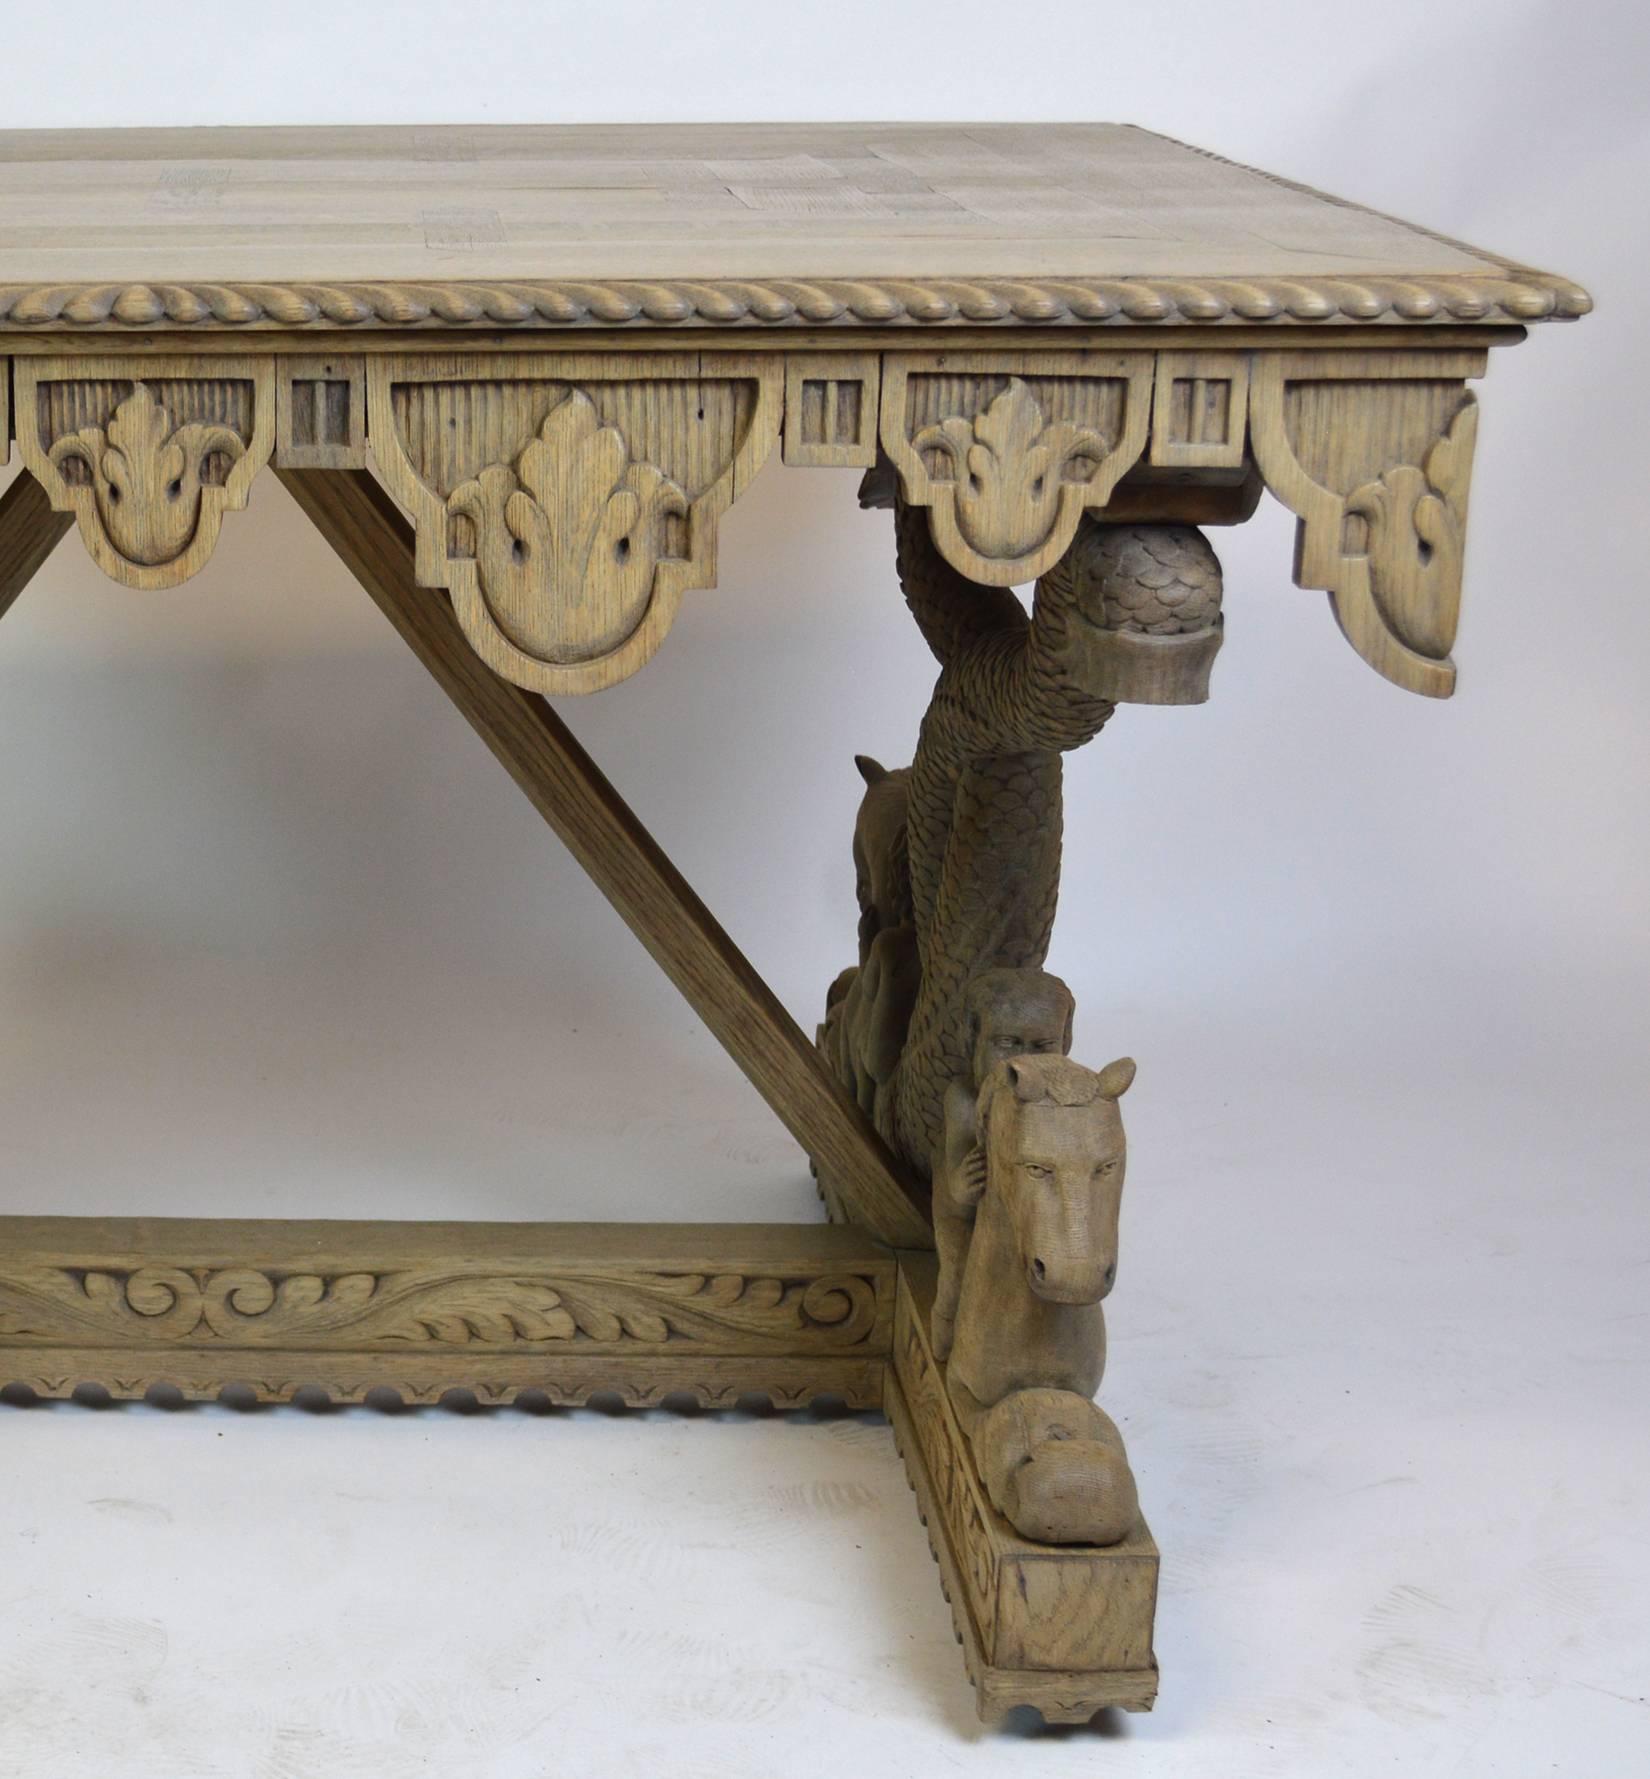 Solid oak Renaissance Revival trestle table which features carved trestle ends depicting putti (cherubs) riding sea horses, united by a carved stretcher. Tabletop of parquetry inlay with a carved rope edge and a wildly carved scalloped apron. Table